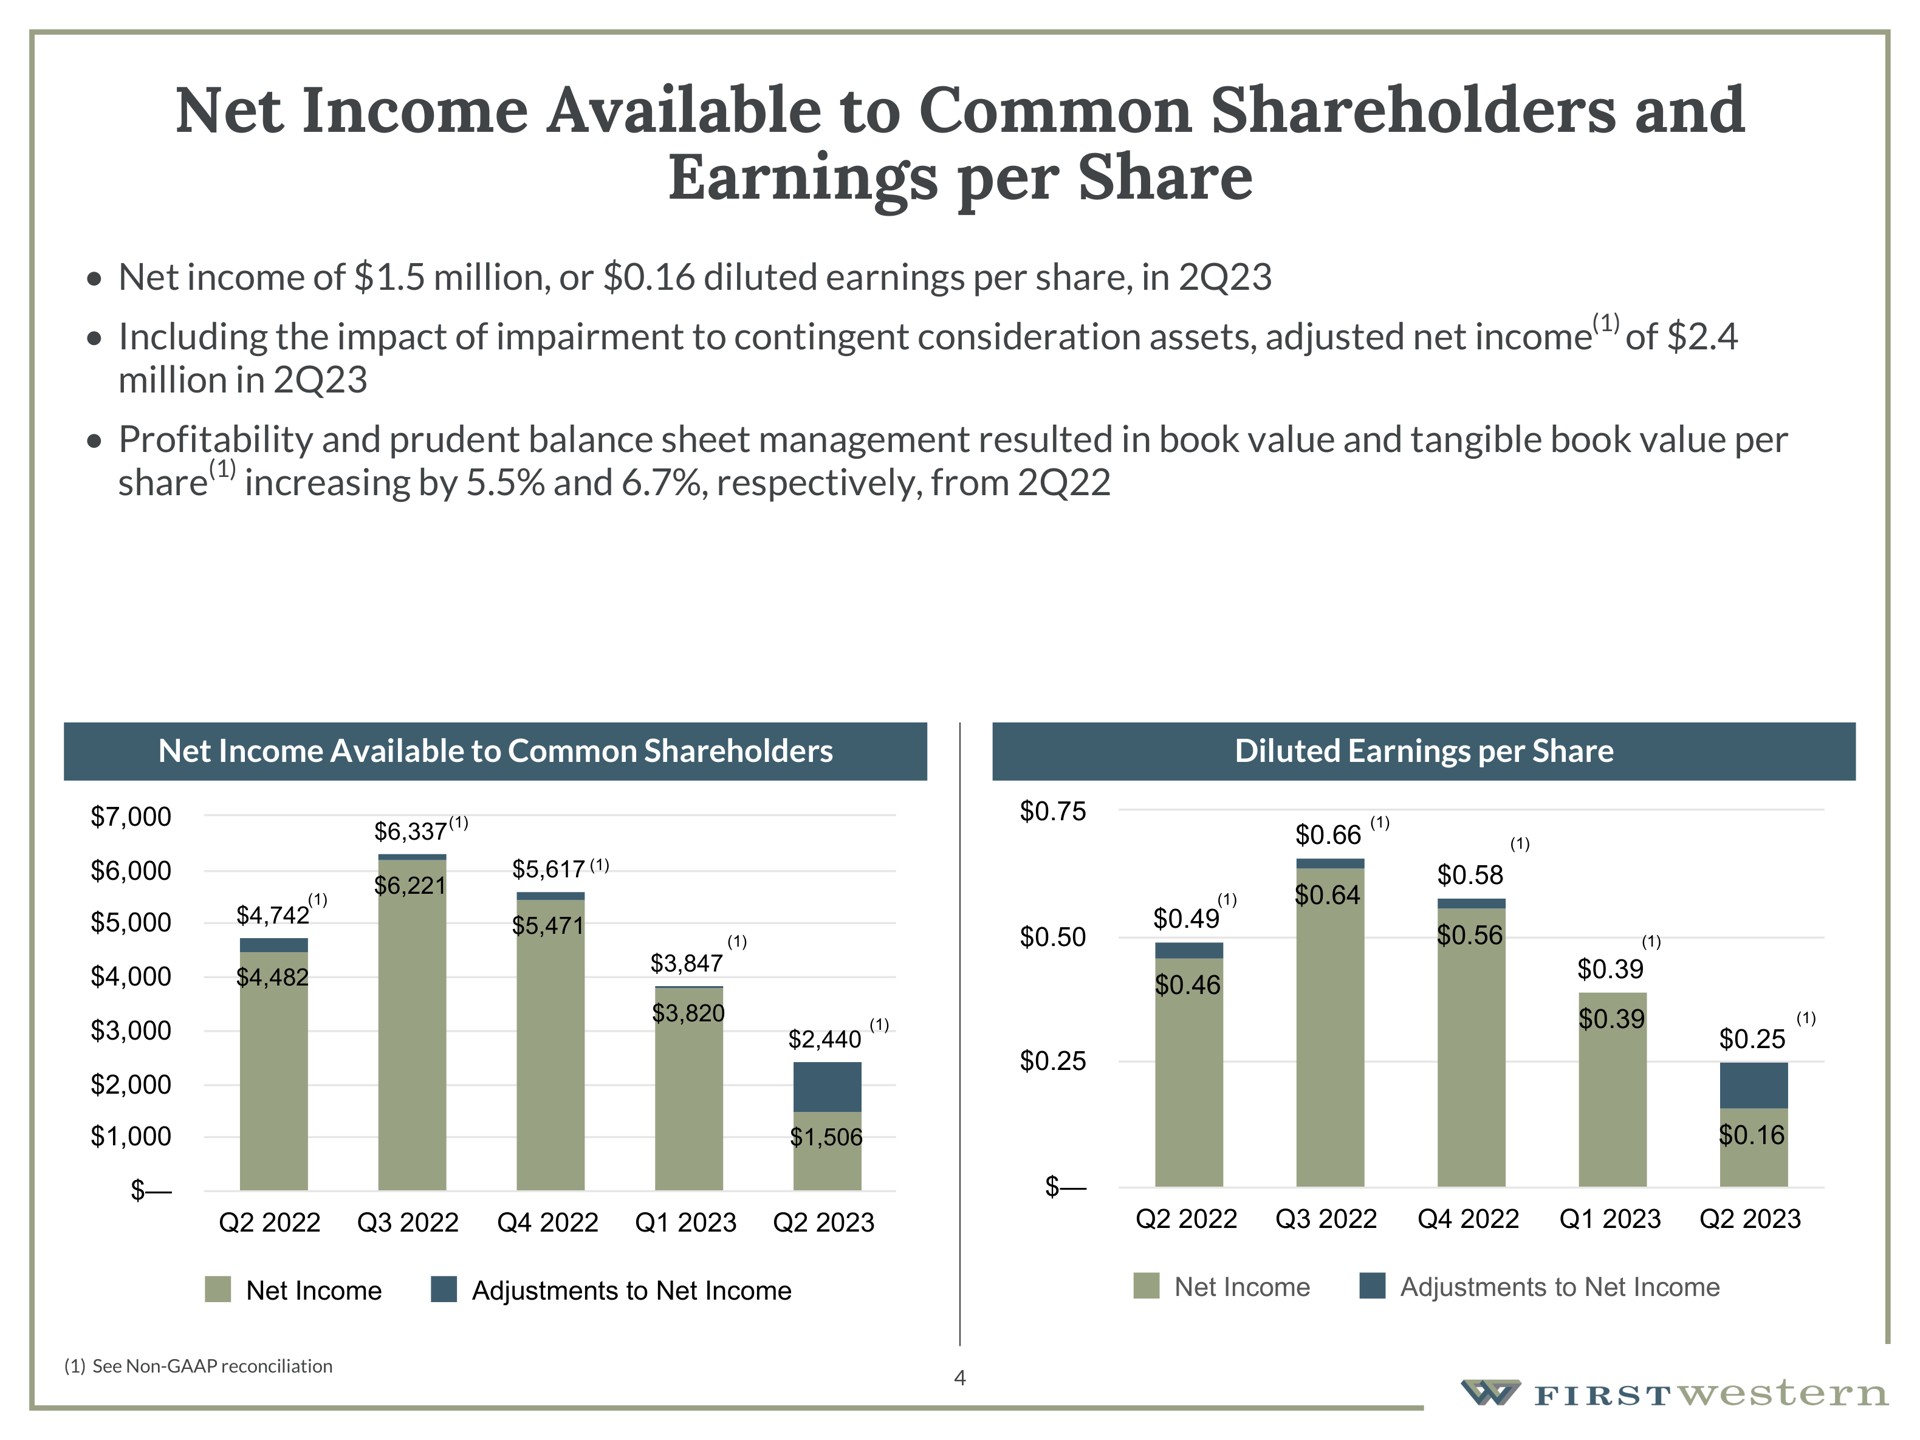 net income available to common shareholders and earnings per share net income of million or diluted earnings per share in including the impact of impairment to contingent consideration assets adjusted net income of million in profitability and prudent balance sheet management resulted in book value and tangible book value per share increasing by and respectively from net income available to common shareholders diluted earnings per share | First Western Financial